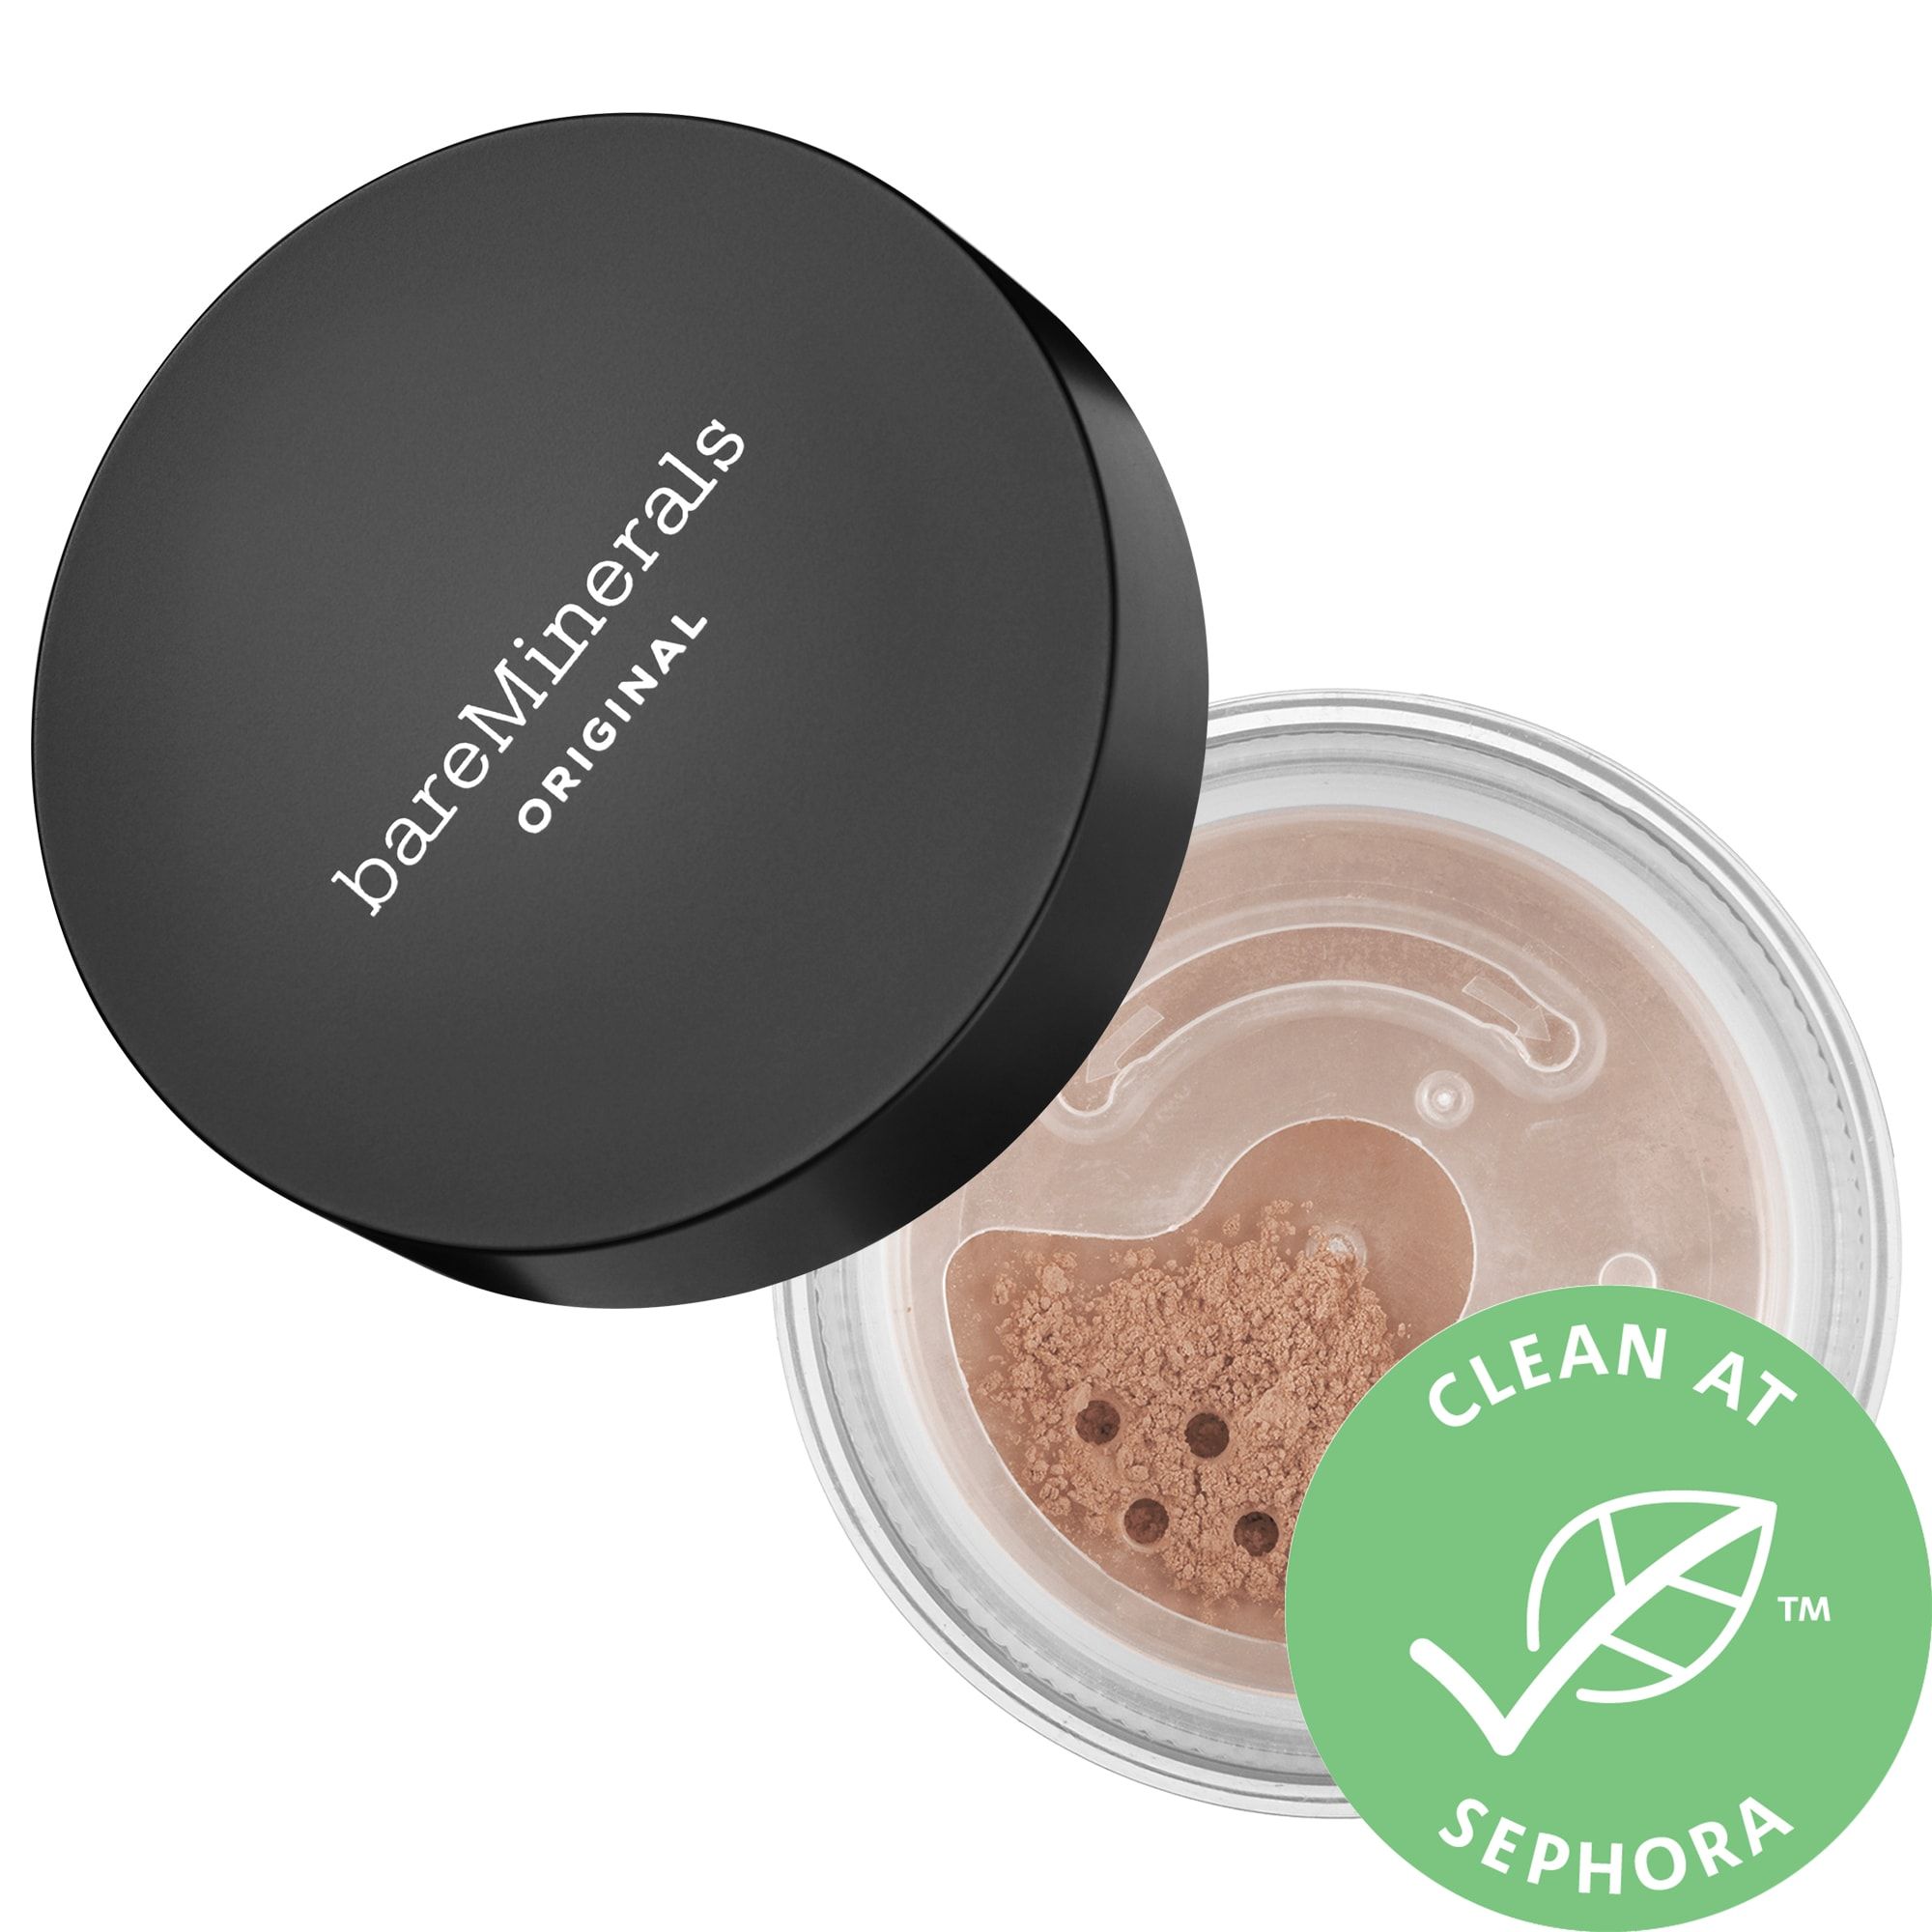 Is skin acne prone best the face what powder for Best Powder